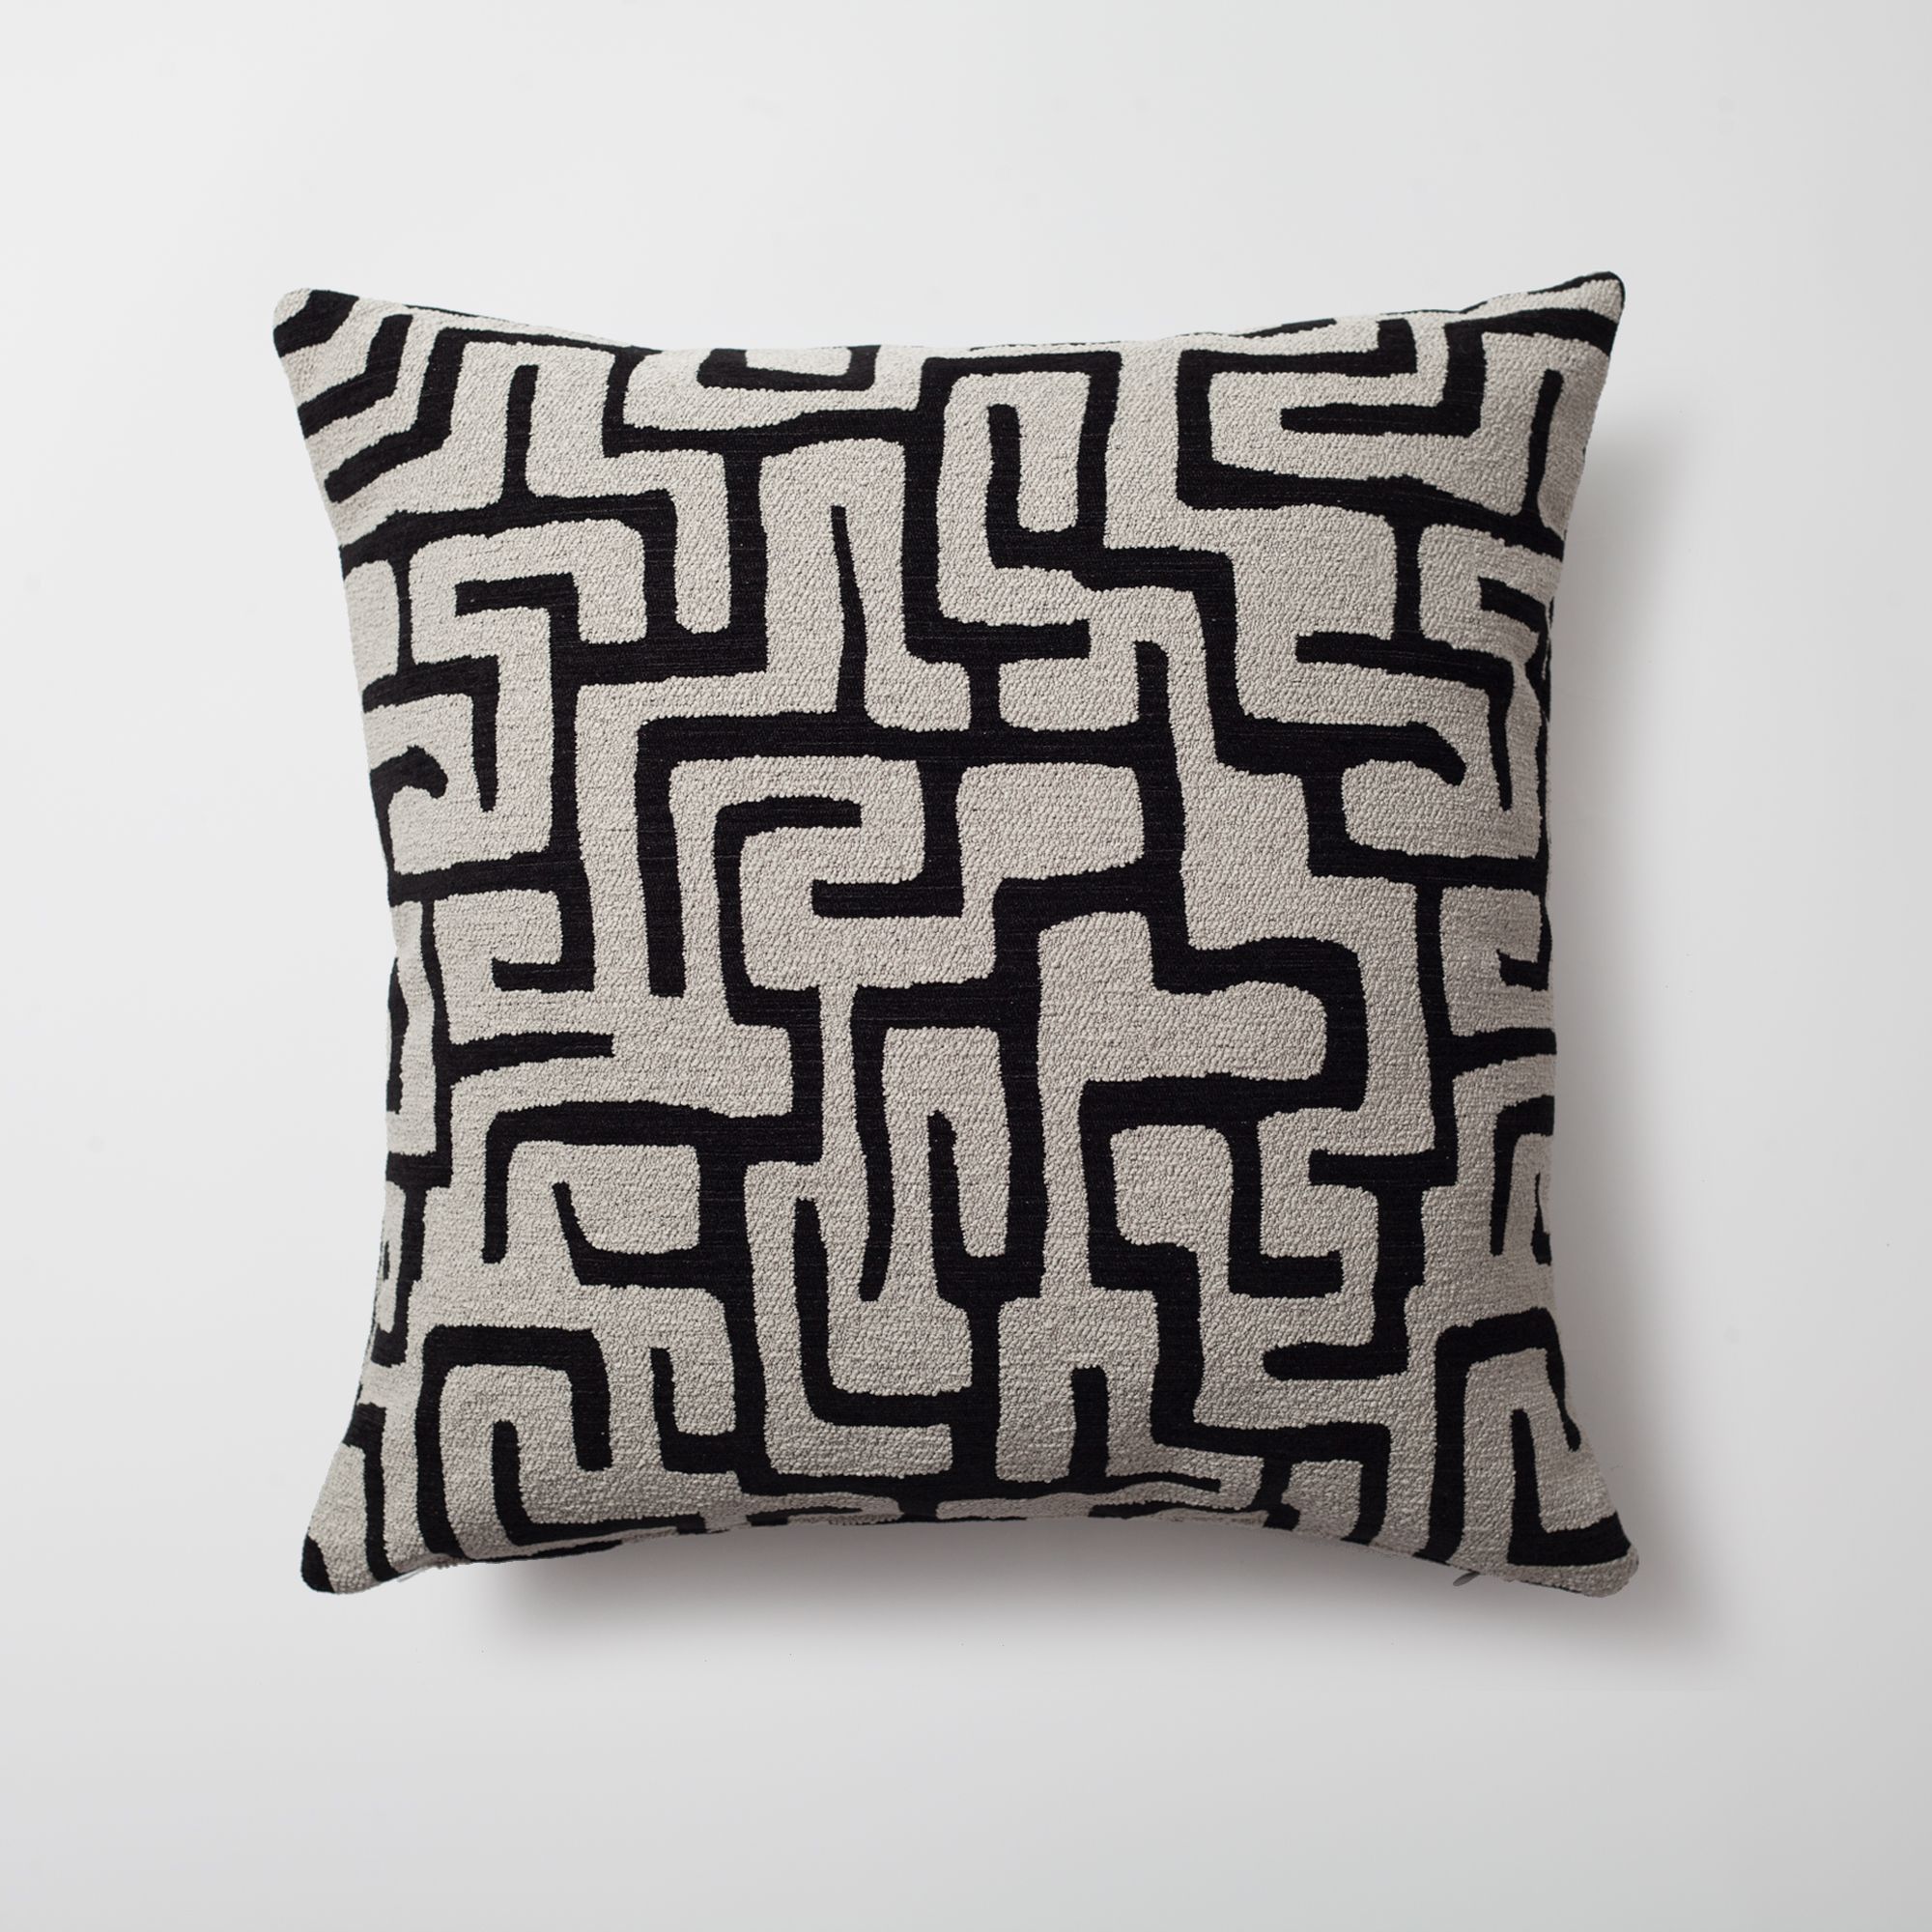 "Norm" - Maze Patterned 20x20 Inch Pillow - Black (Cover Only)